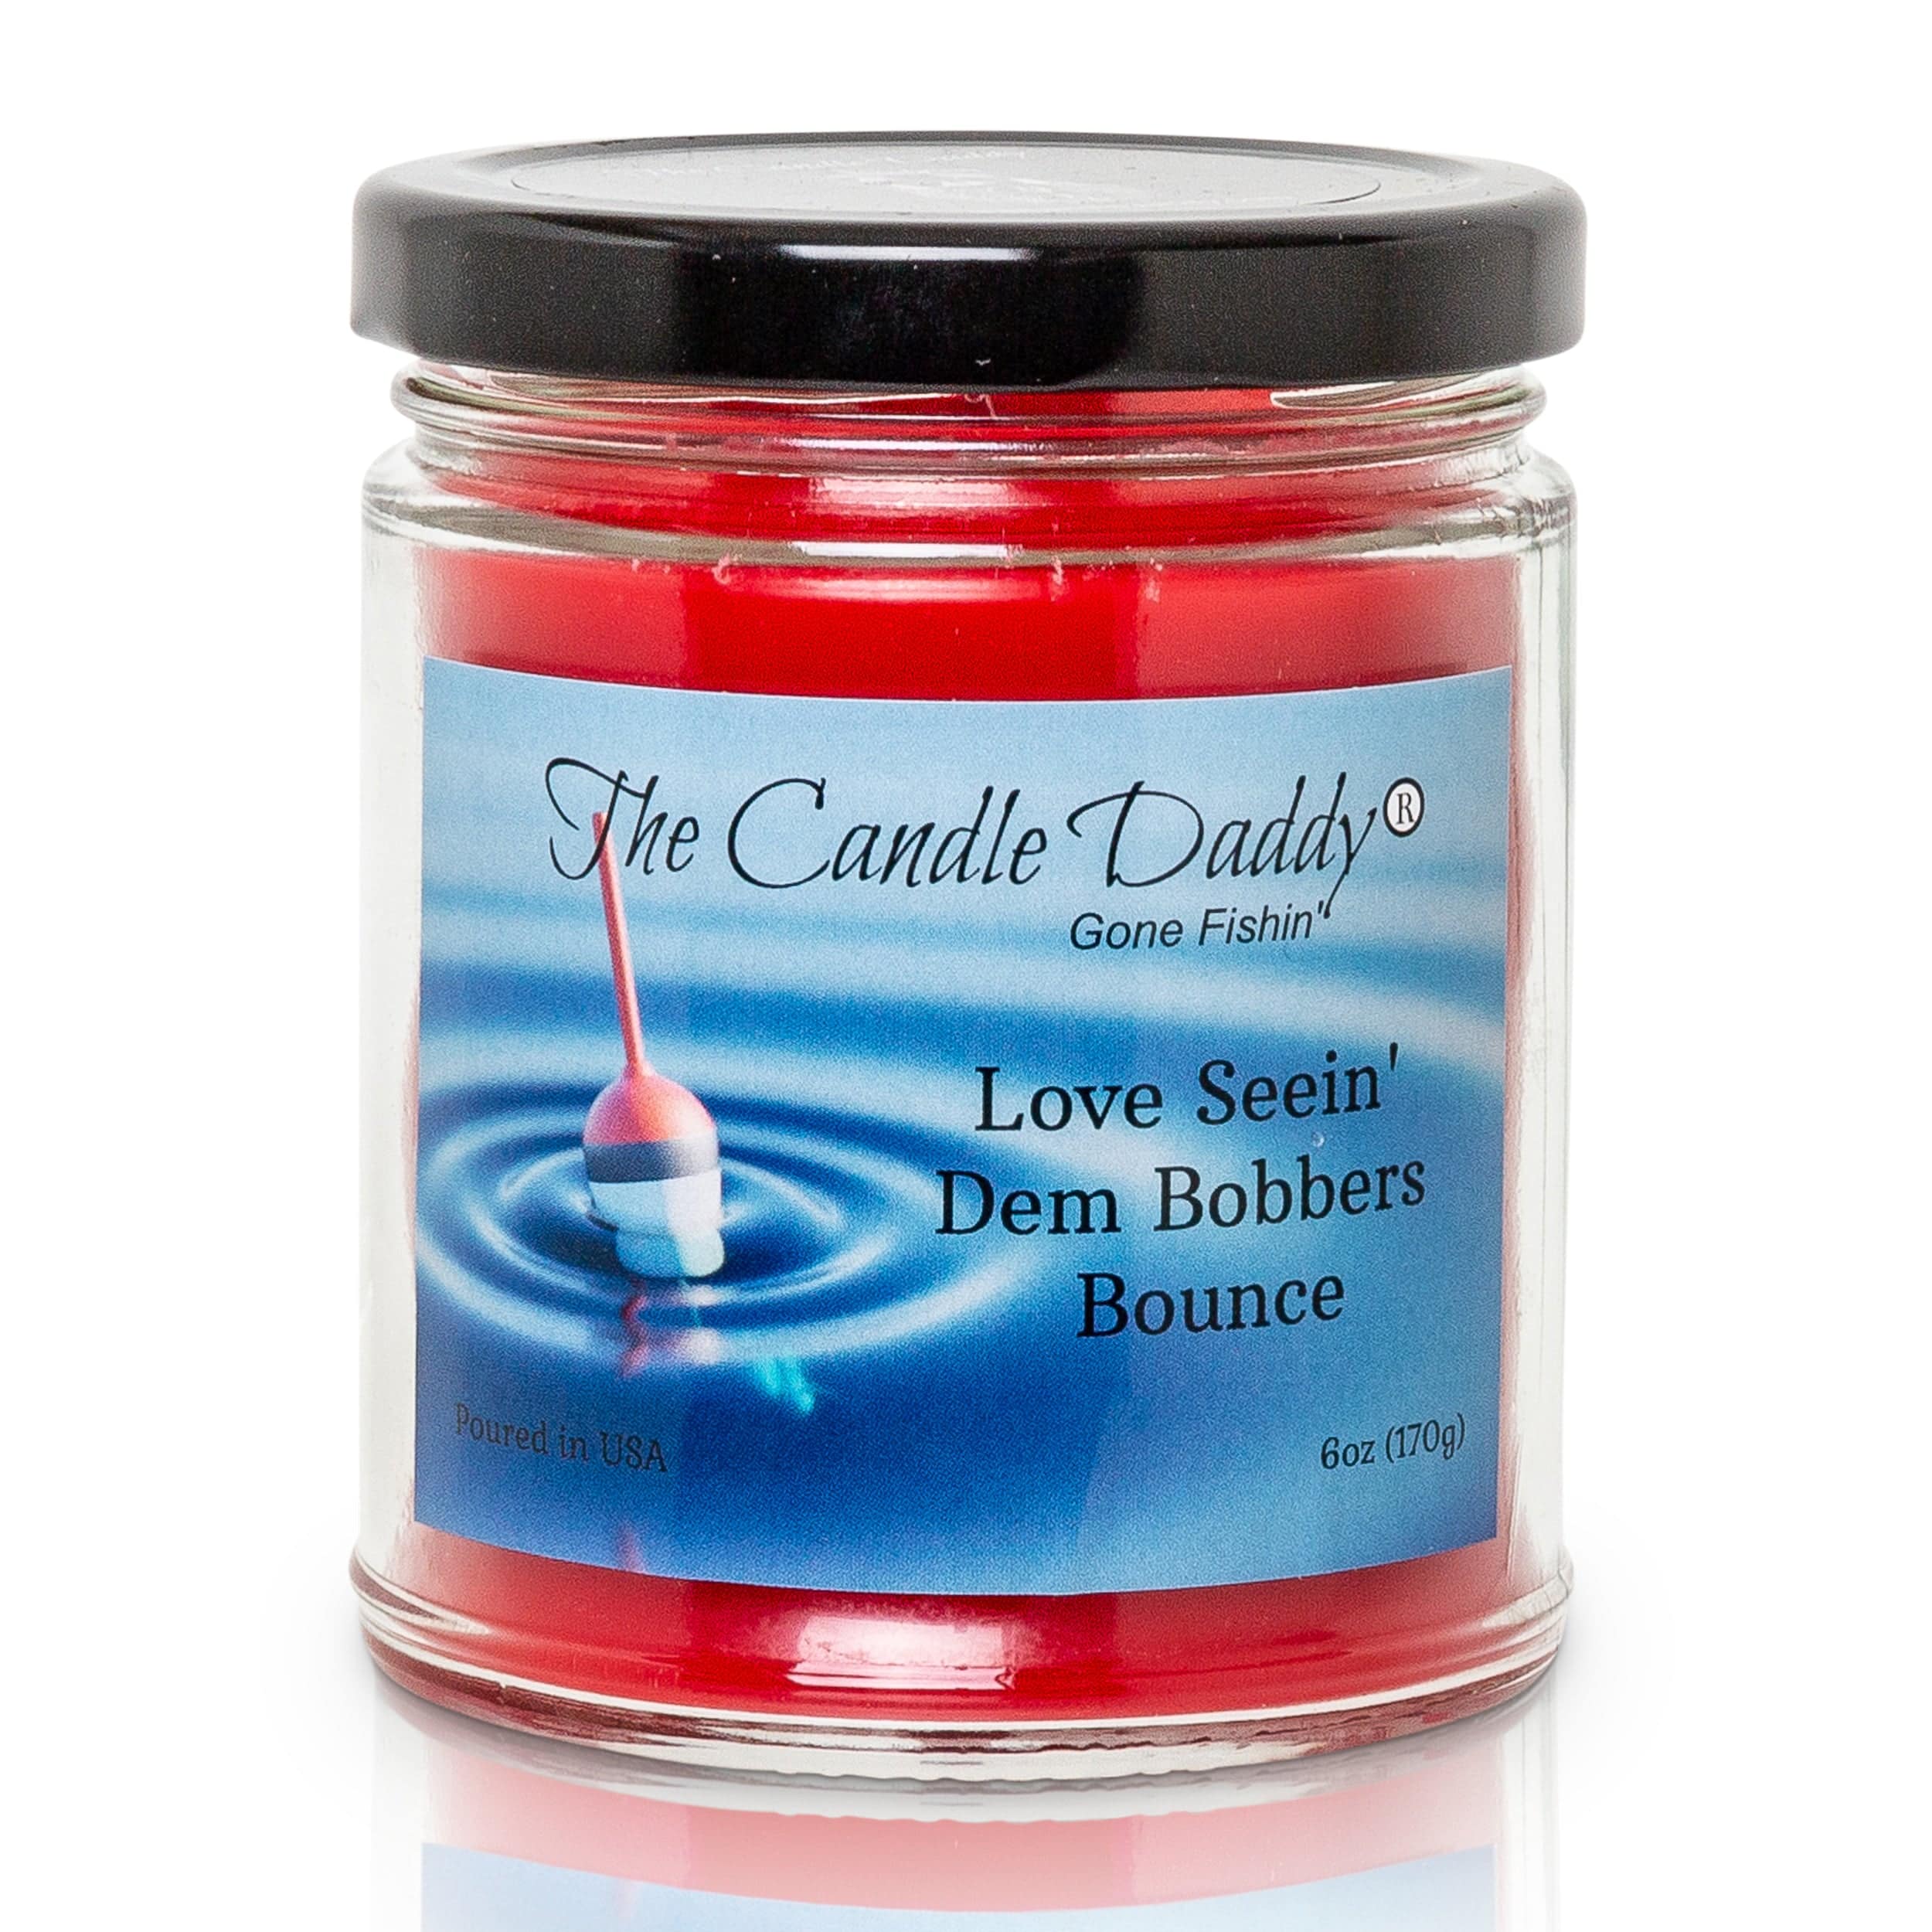 The Candle Daddy's Gone Fishin' -Love Seein' Dem Bobbers Bounce